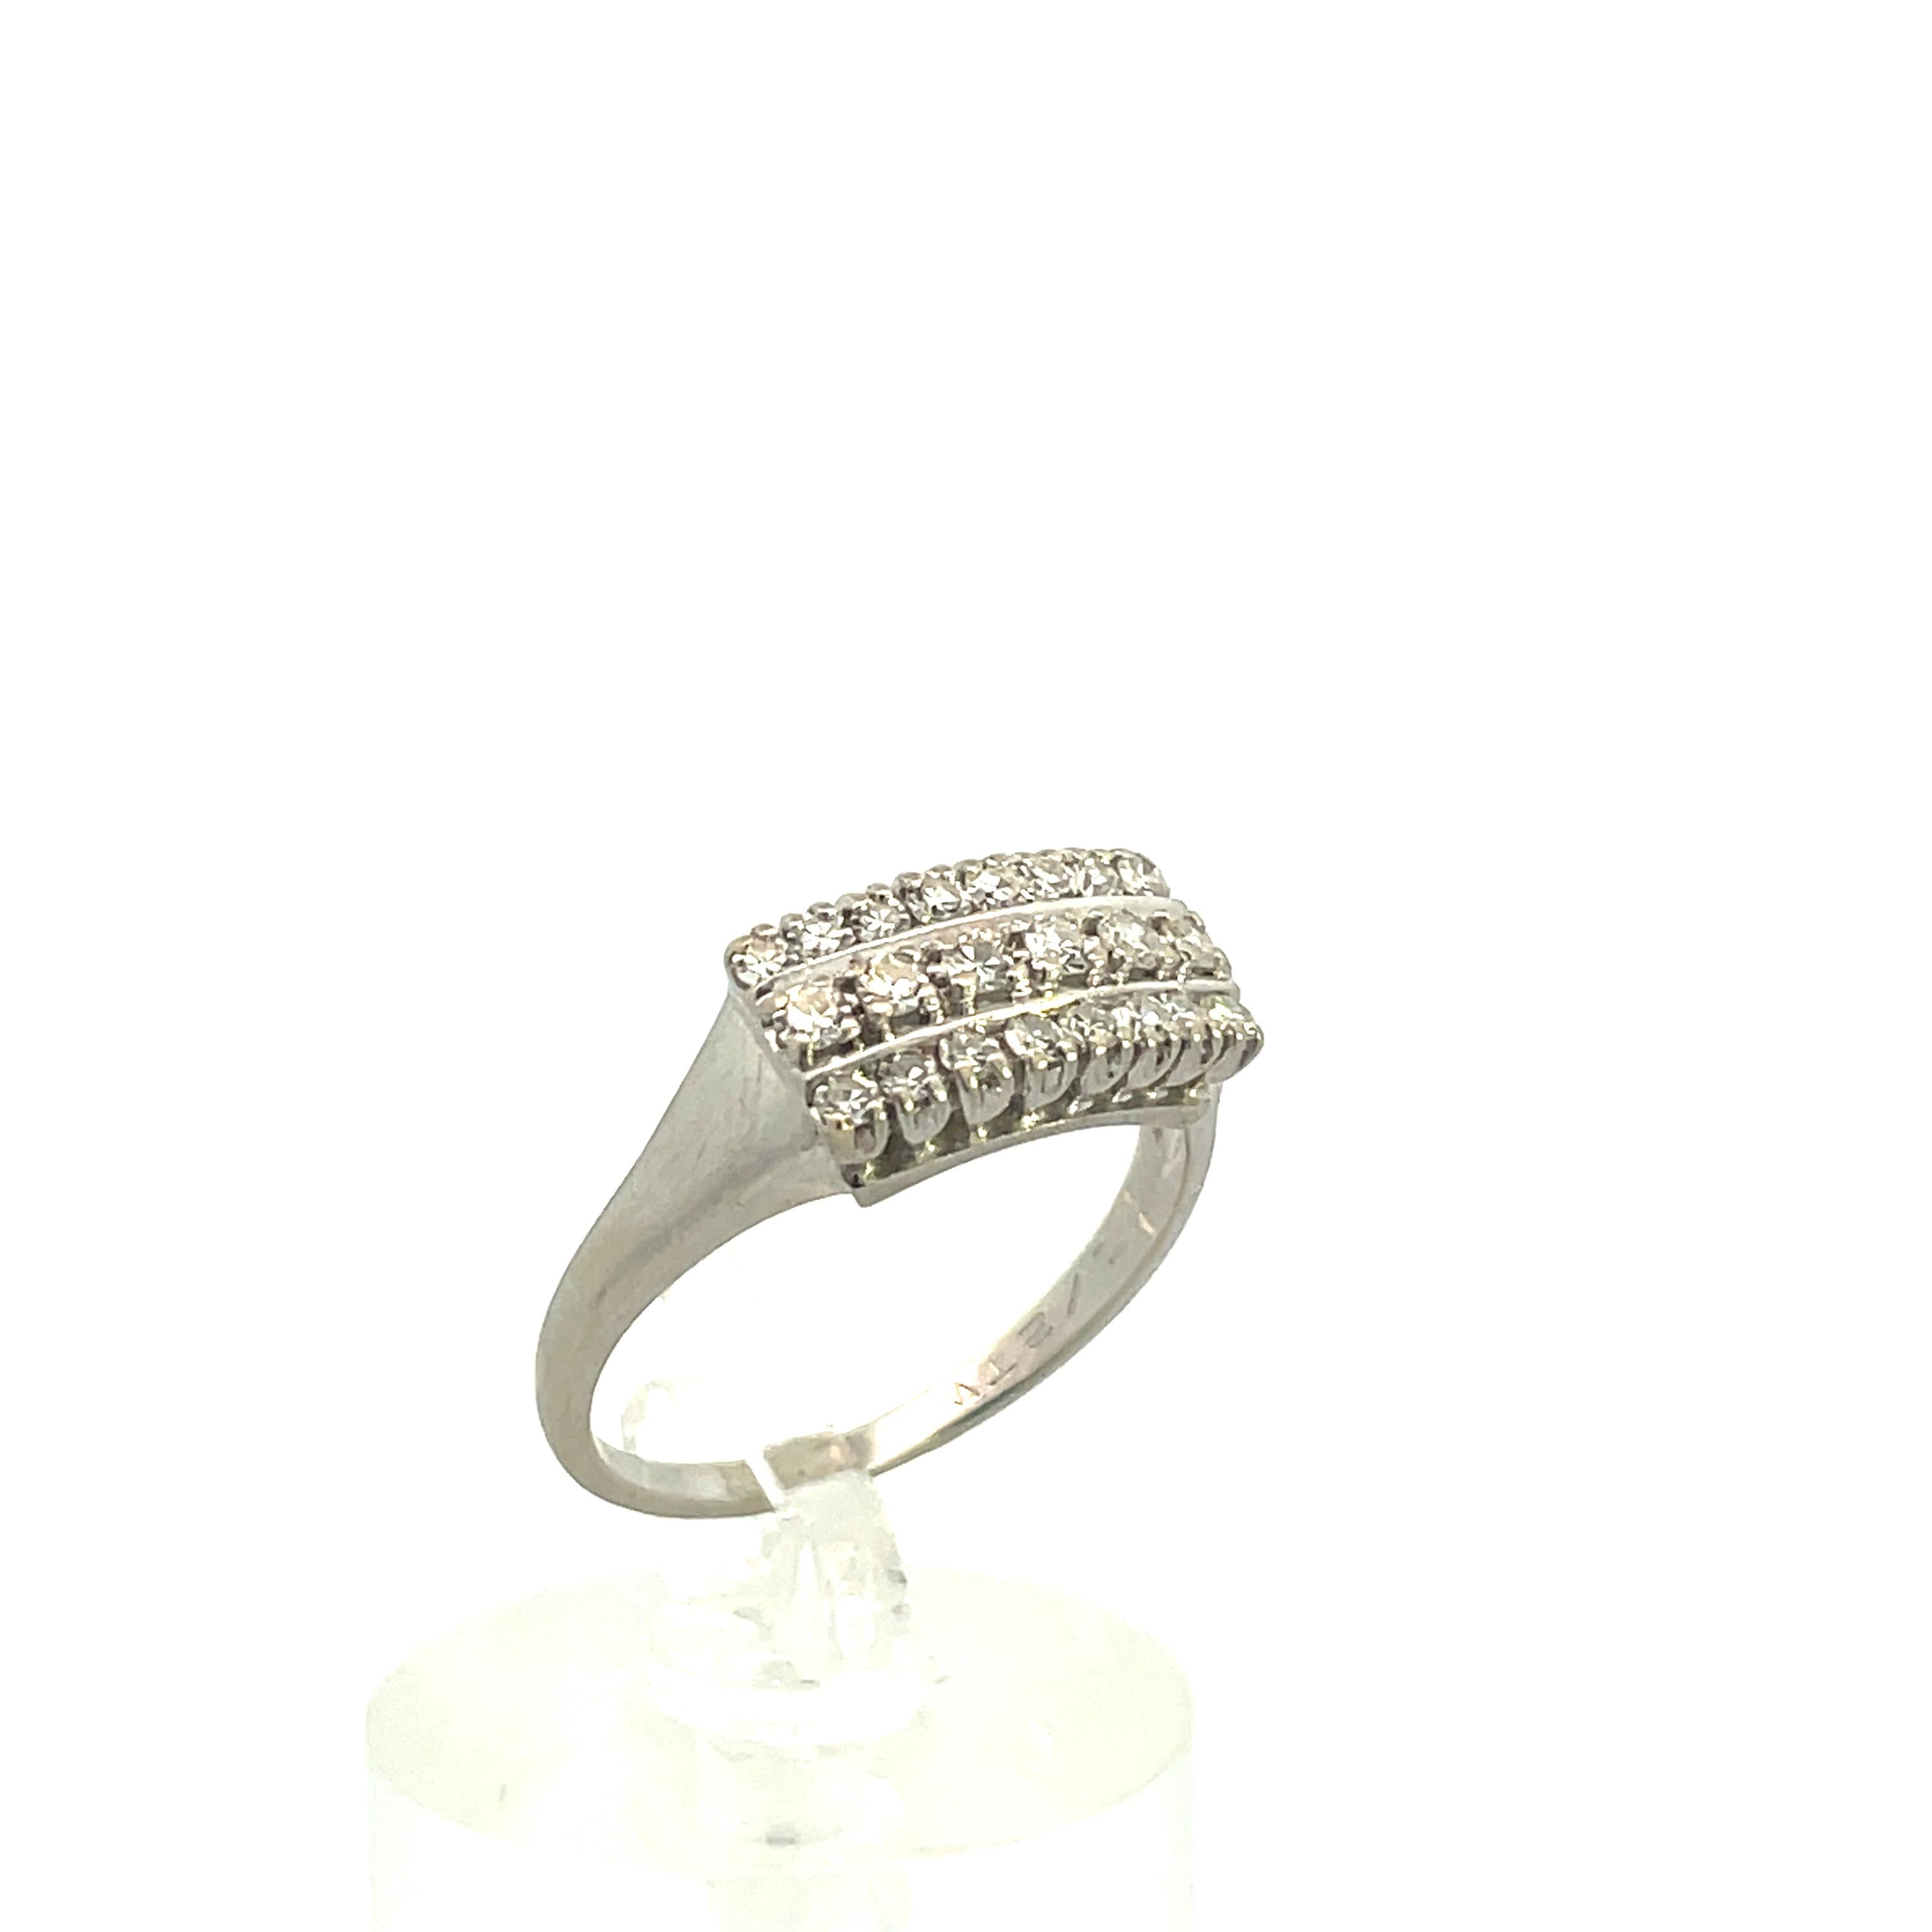 Contemporary 14K White Gold Diamond Ring  In Excellent Condition For Sale In Lexington, KY